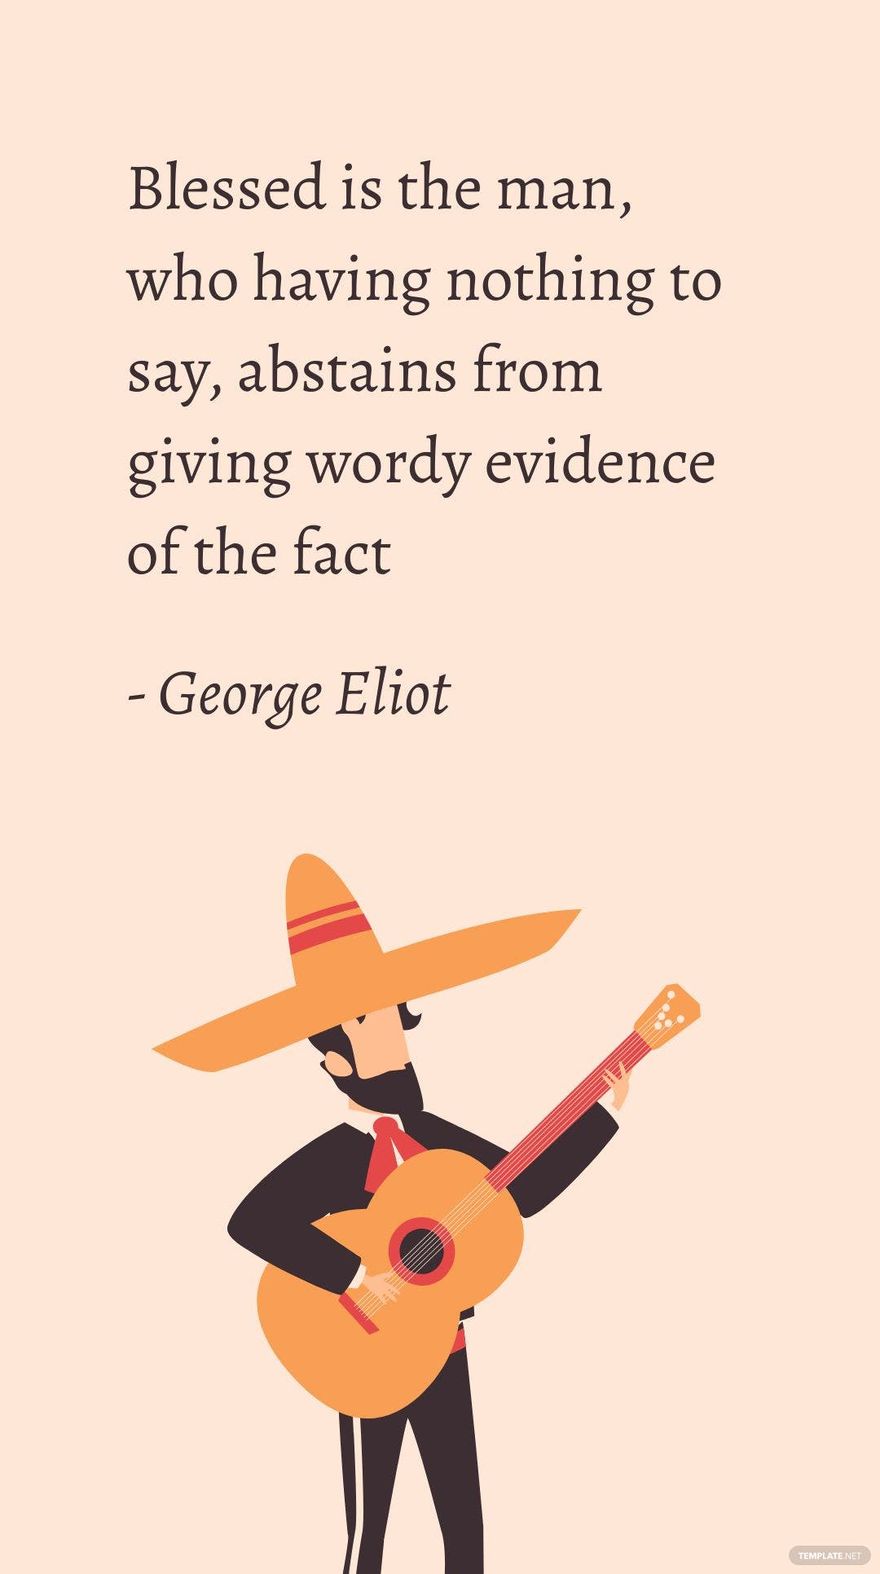 Free George Eliot - Blessed is the man, who having nothing to say, abstains from giving wordy evidence of the fact in JPG